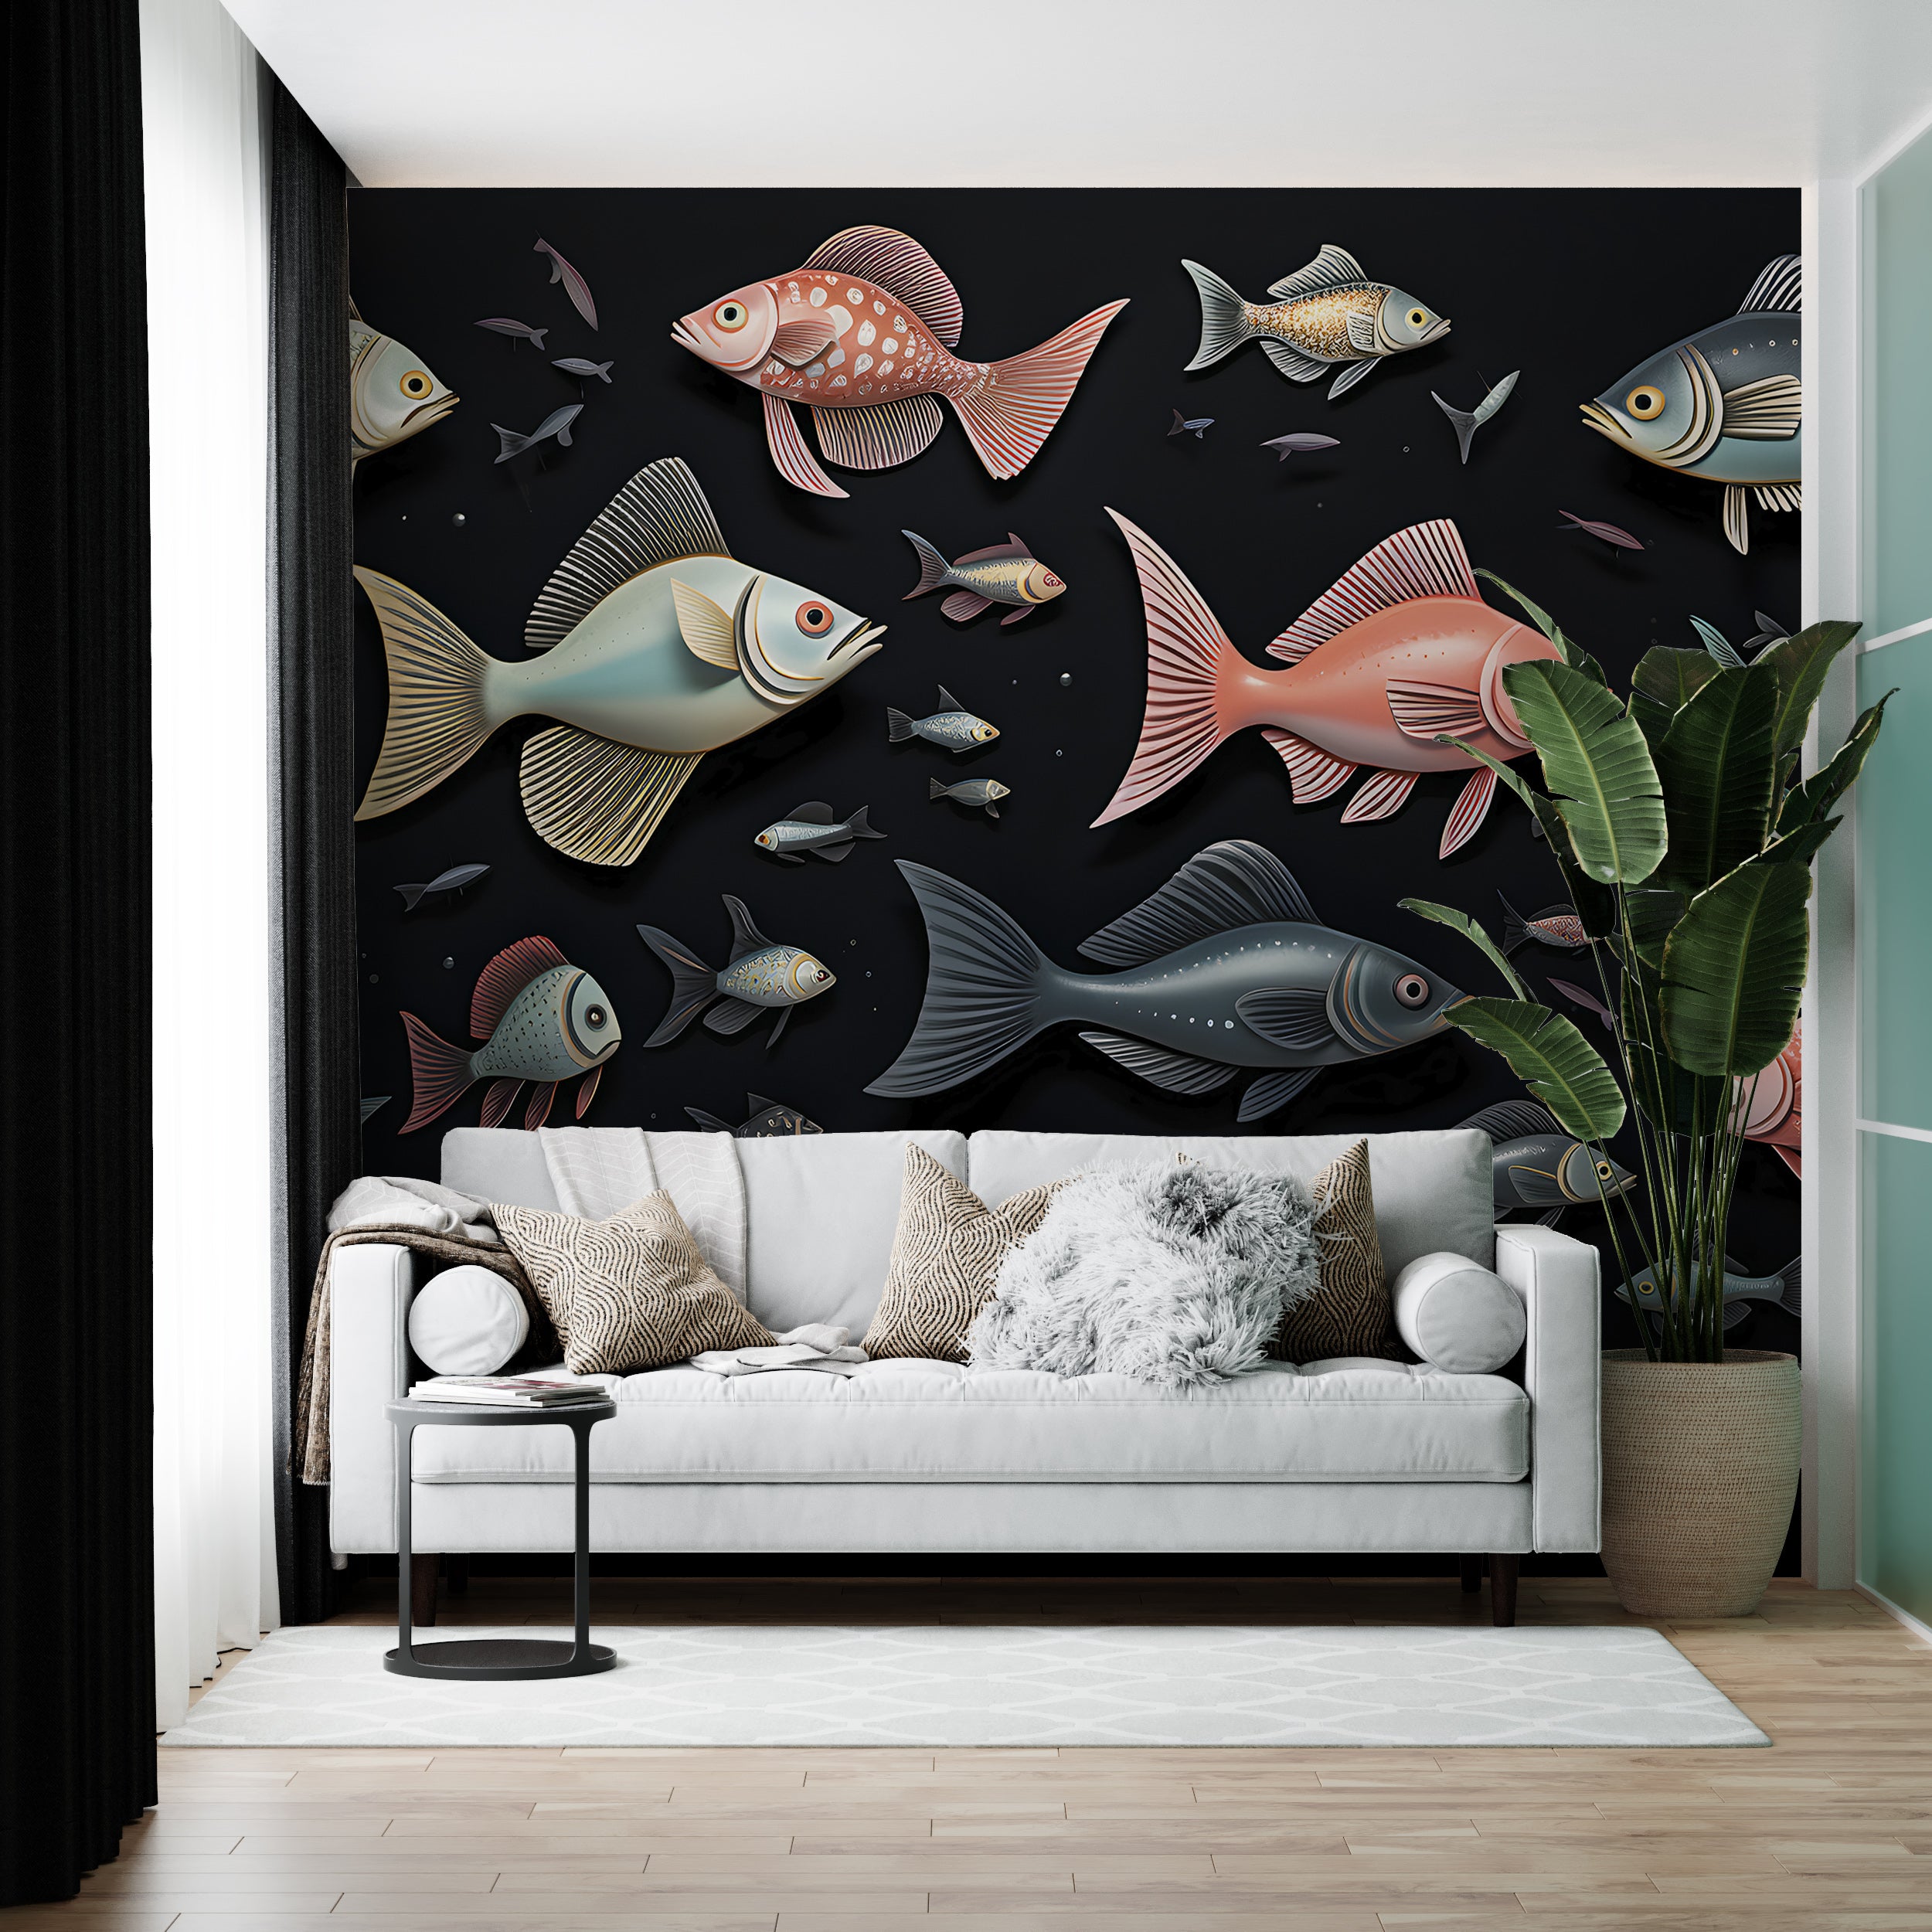 Removable Colorful Fish Wall Decor